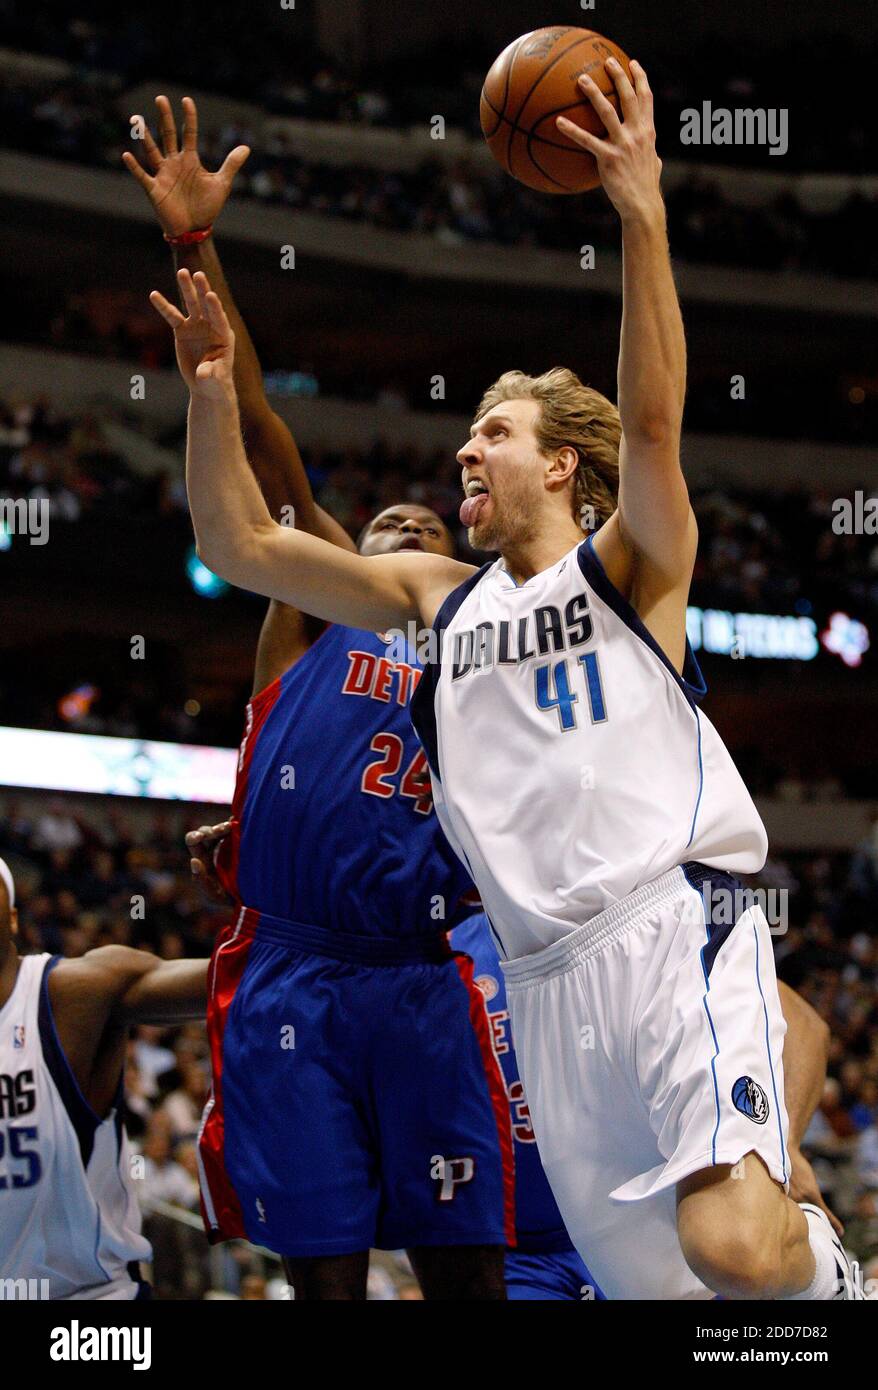 Dallas Mavericks' Dirk Nowitzki shoots over Detroit Pistons' Antonio McDyess in first half action at the American Airlines Center in Dallas, TX, USA on  January 9, 2008. Dallas Mavericks won 102-86. Photo by Khampha Bouaphanh/Fort Worth Star-Telegram/MCT/Cameleon/ABACAPRESS.COM Stock Photo